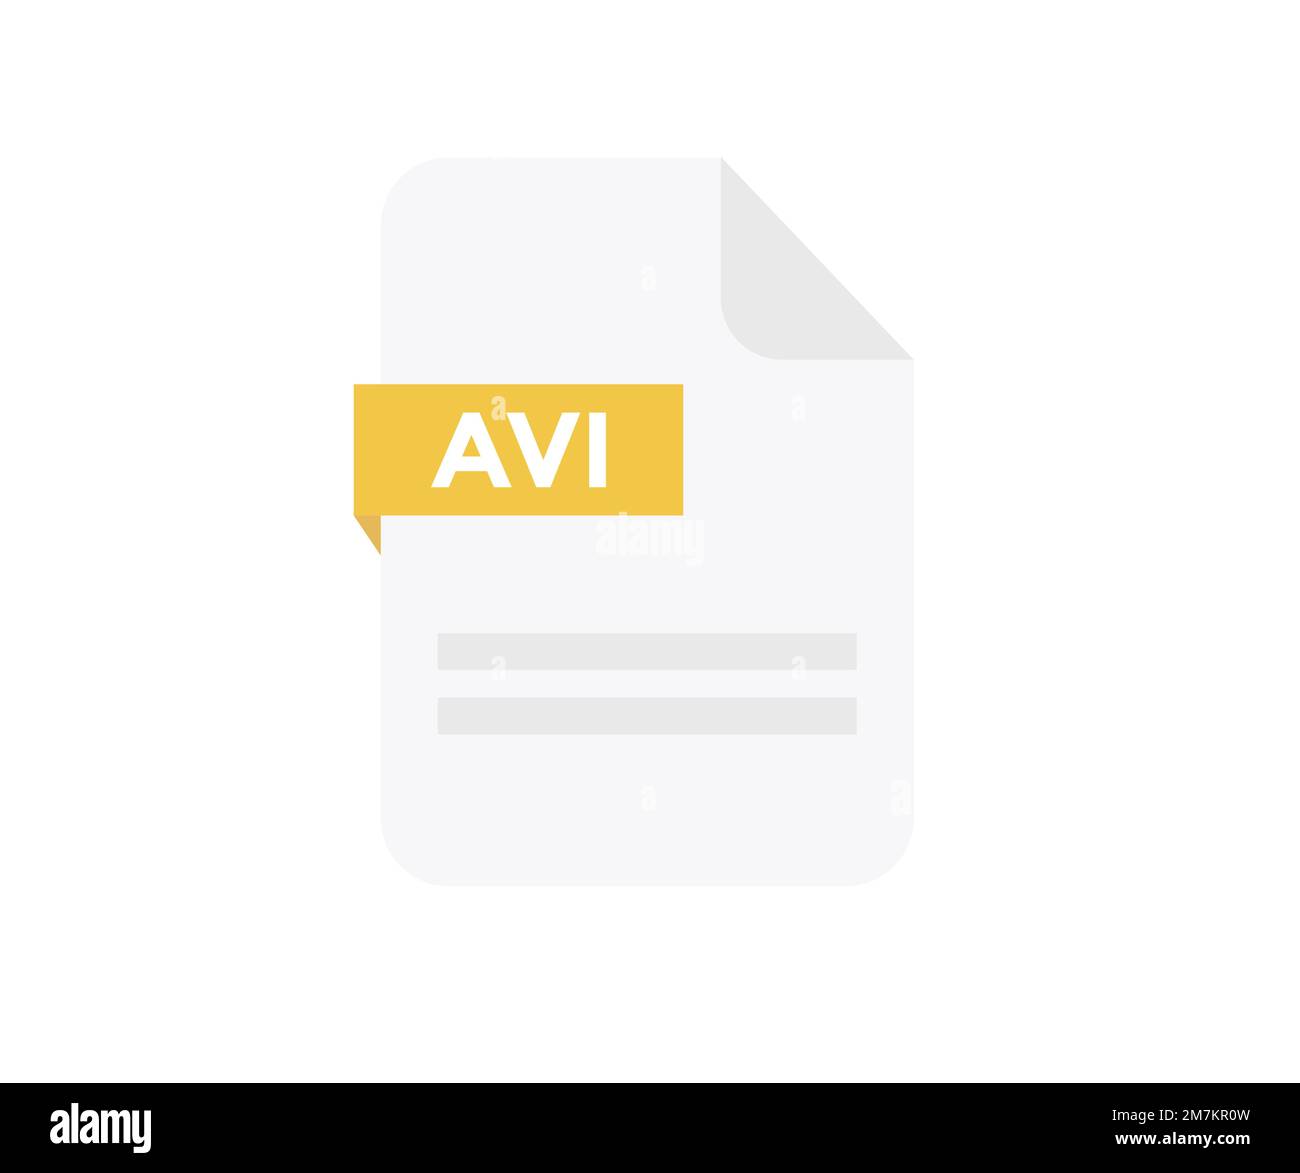 File format AVI logo design. Document file icon, internet, extension, sign, type, presentation, graphic, application. Element for applications. Stock Vector